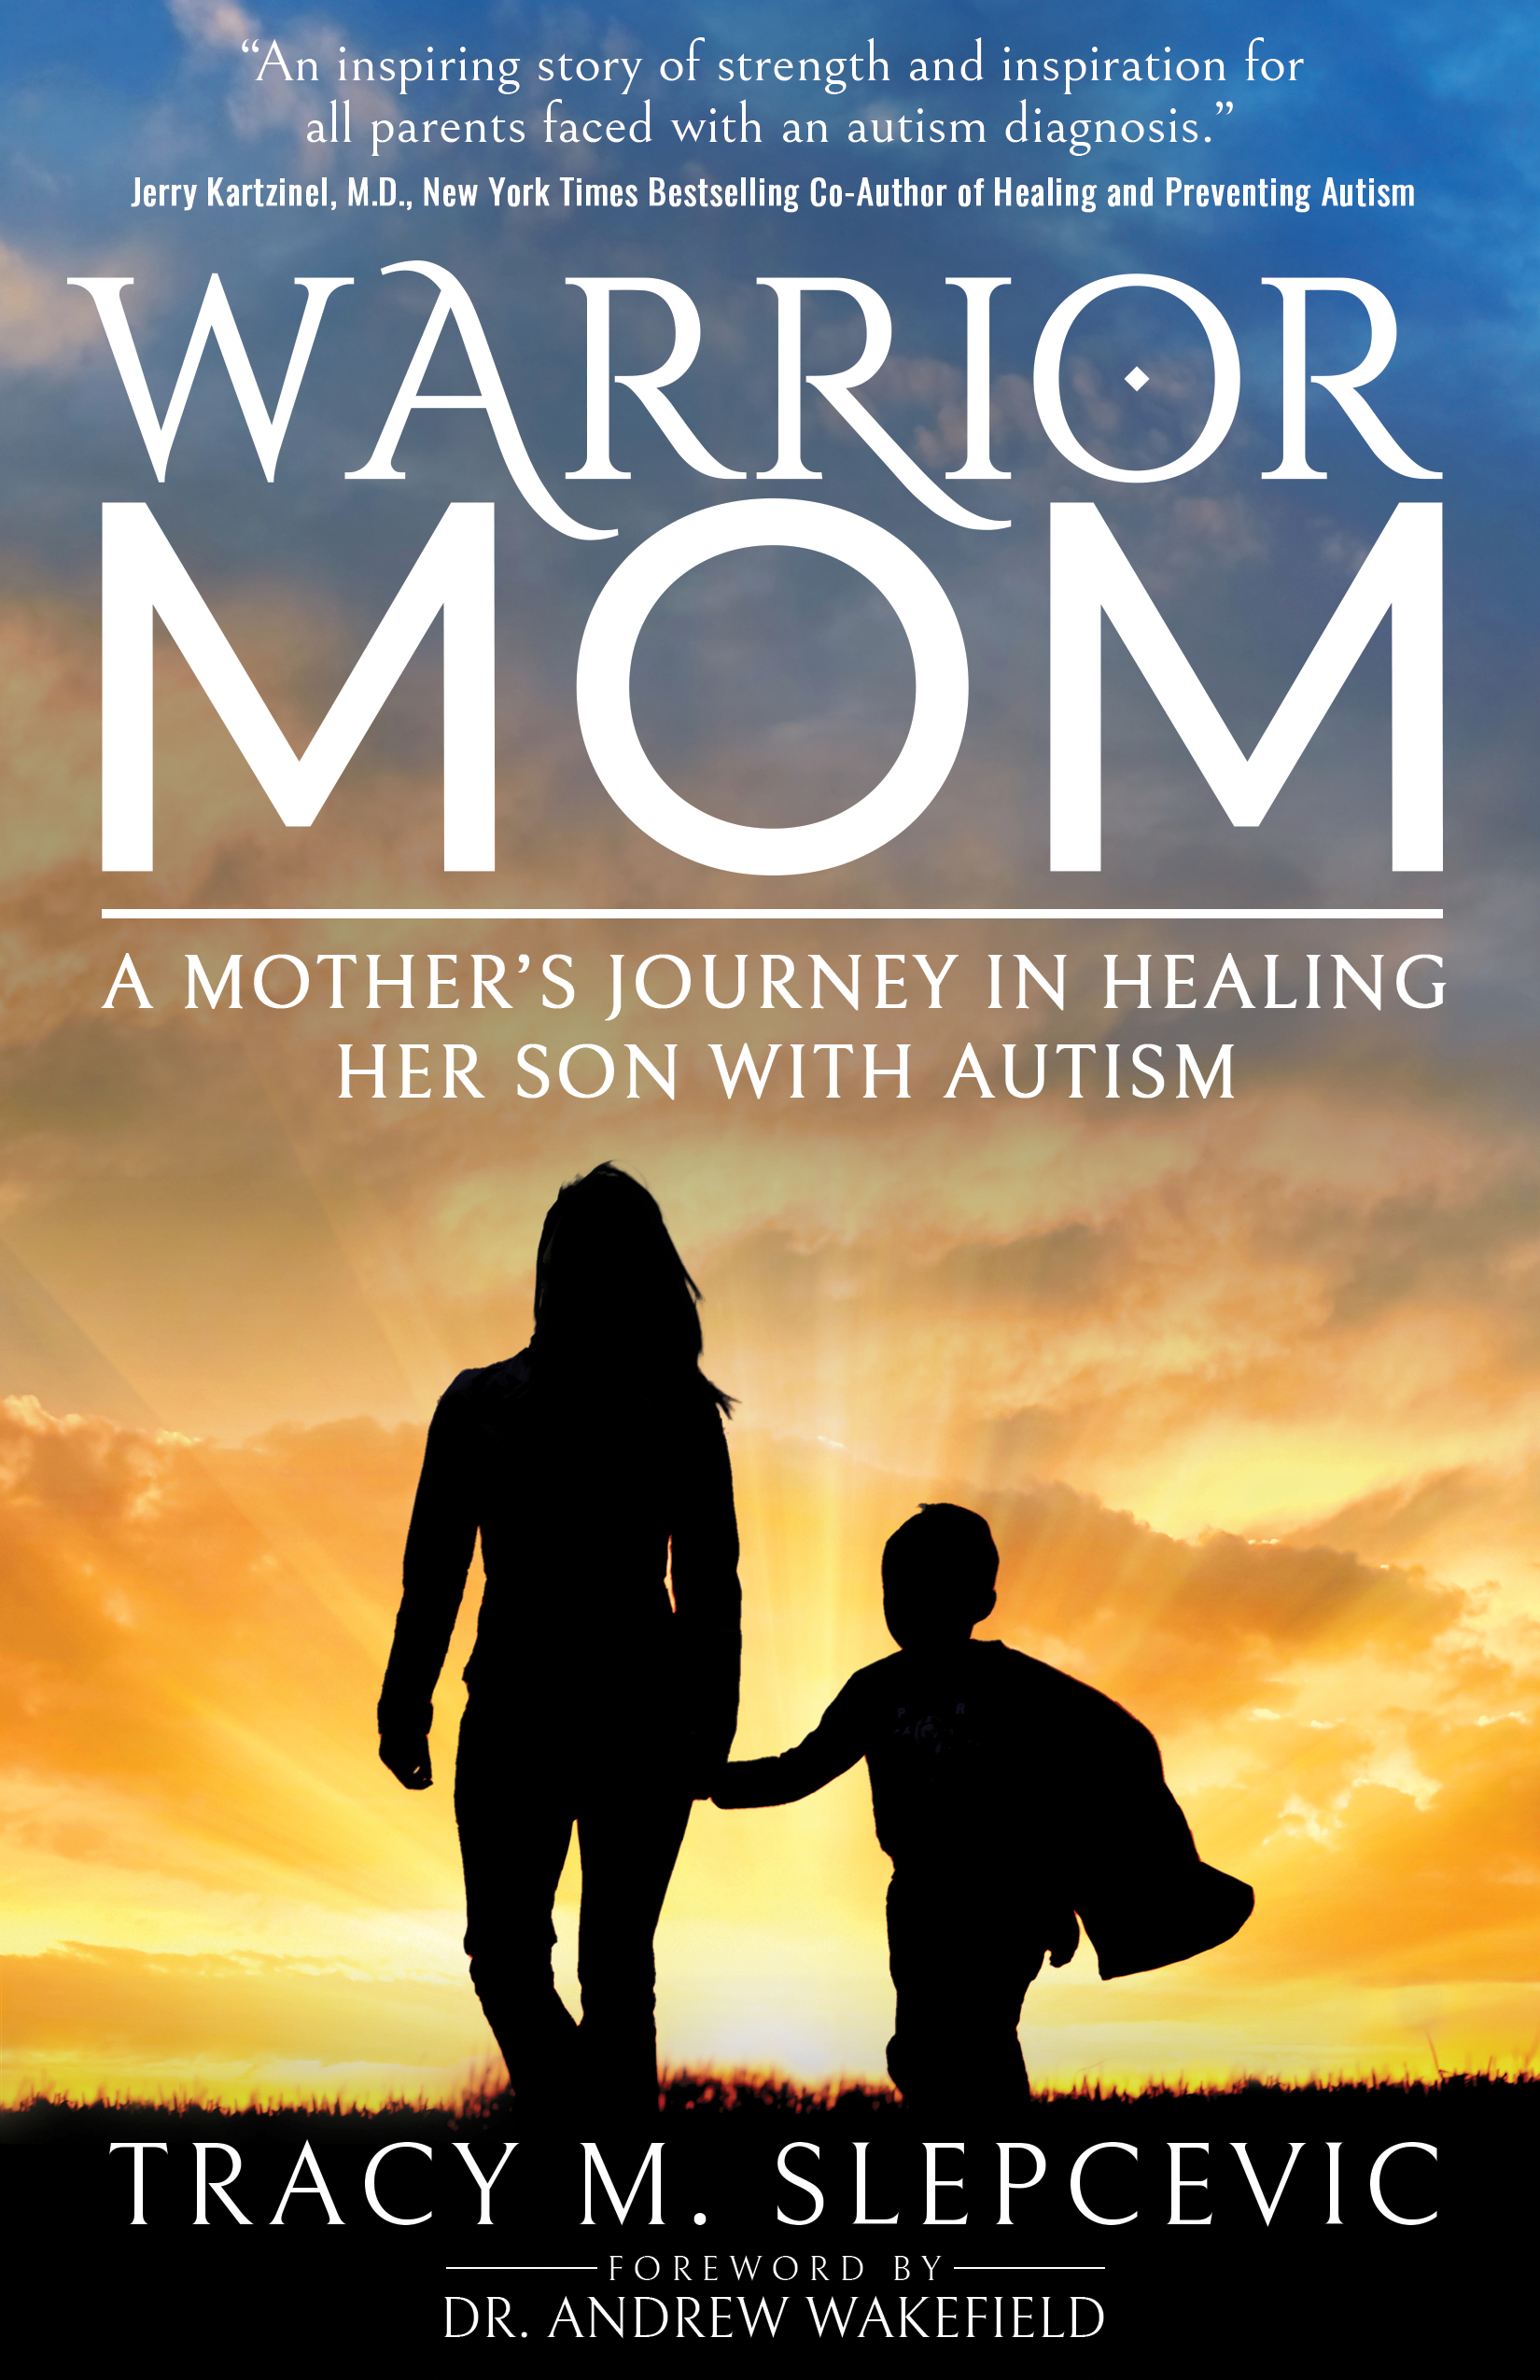 "Warrior Mom: A Mother's Journey in Healing Her Son with Autism" by Tracy Slepcevic - Paperback Edition Available April 4, 2023